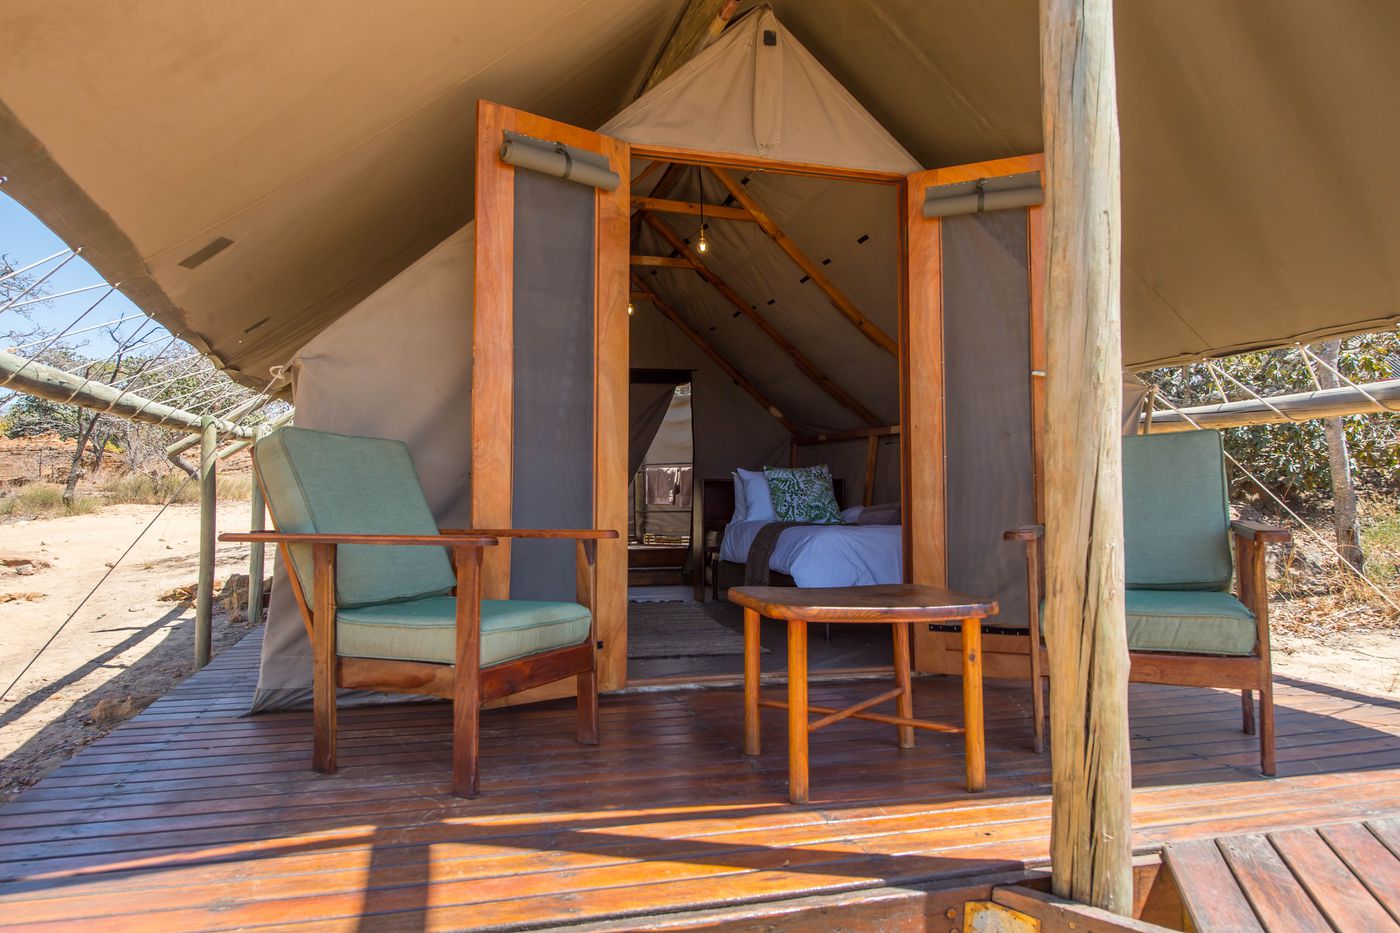 African Explorer (Kgotla Camp) itinerary.